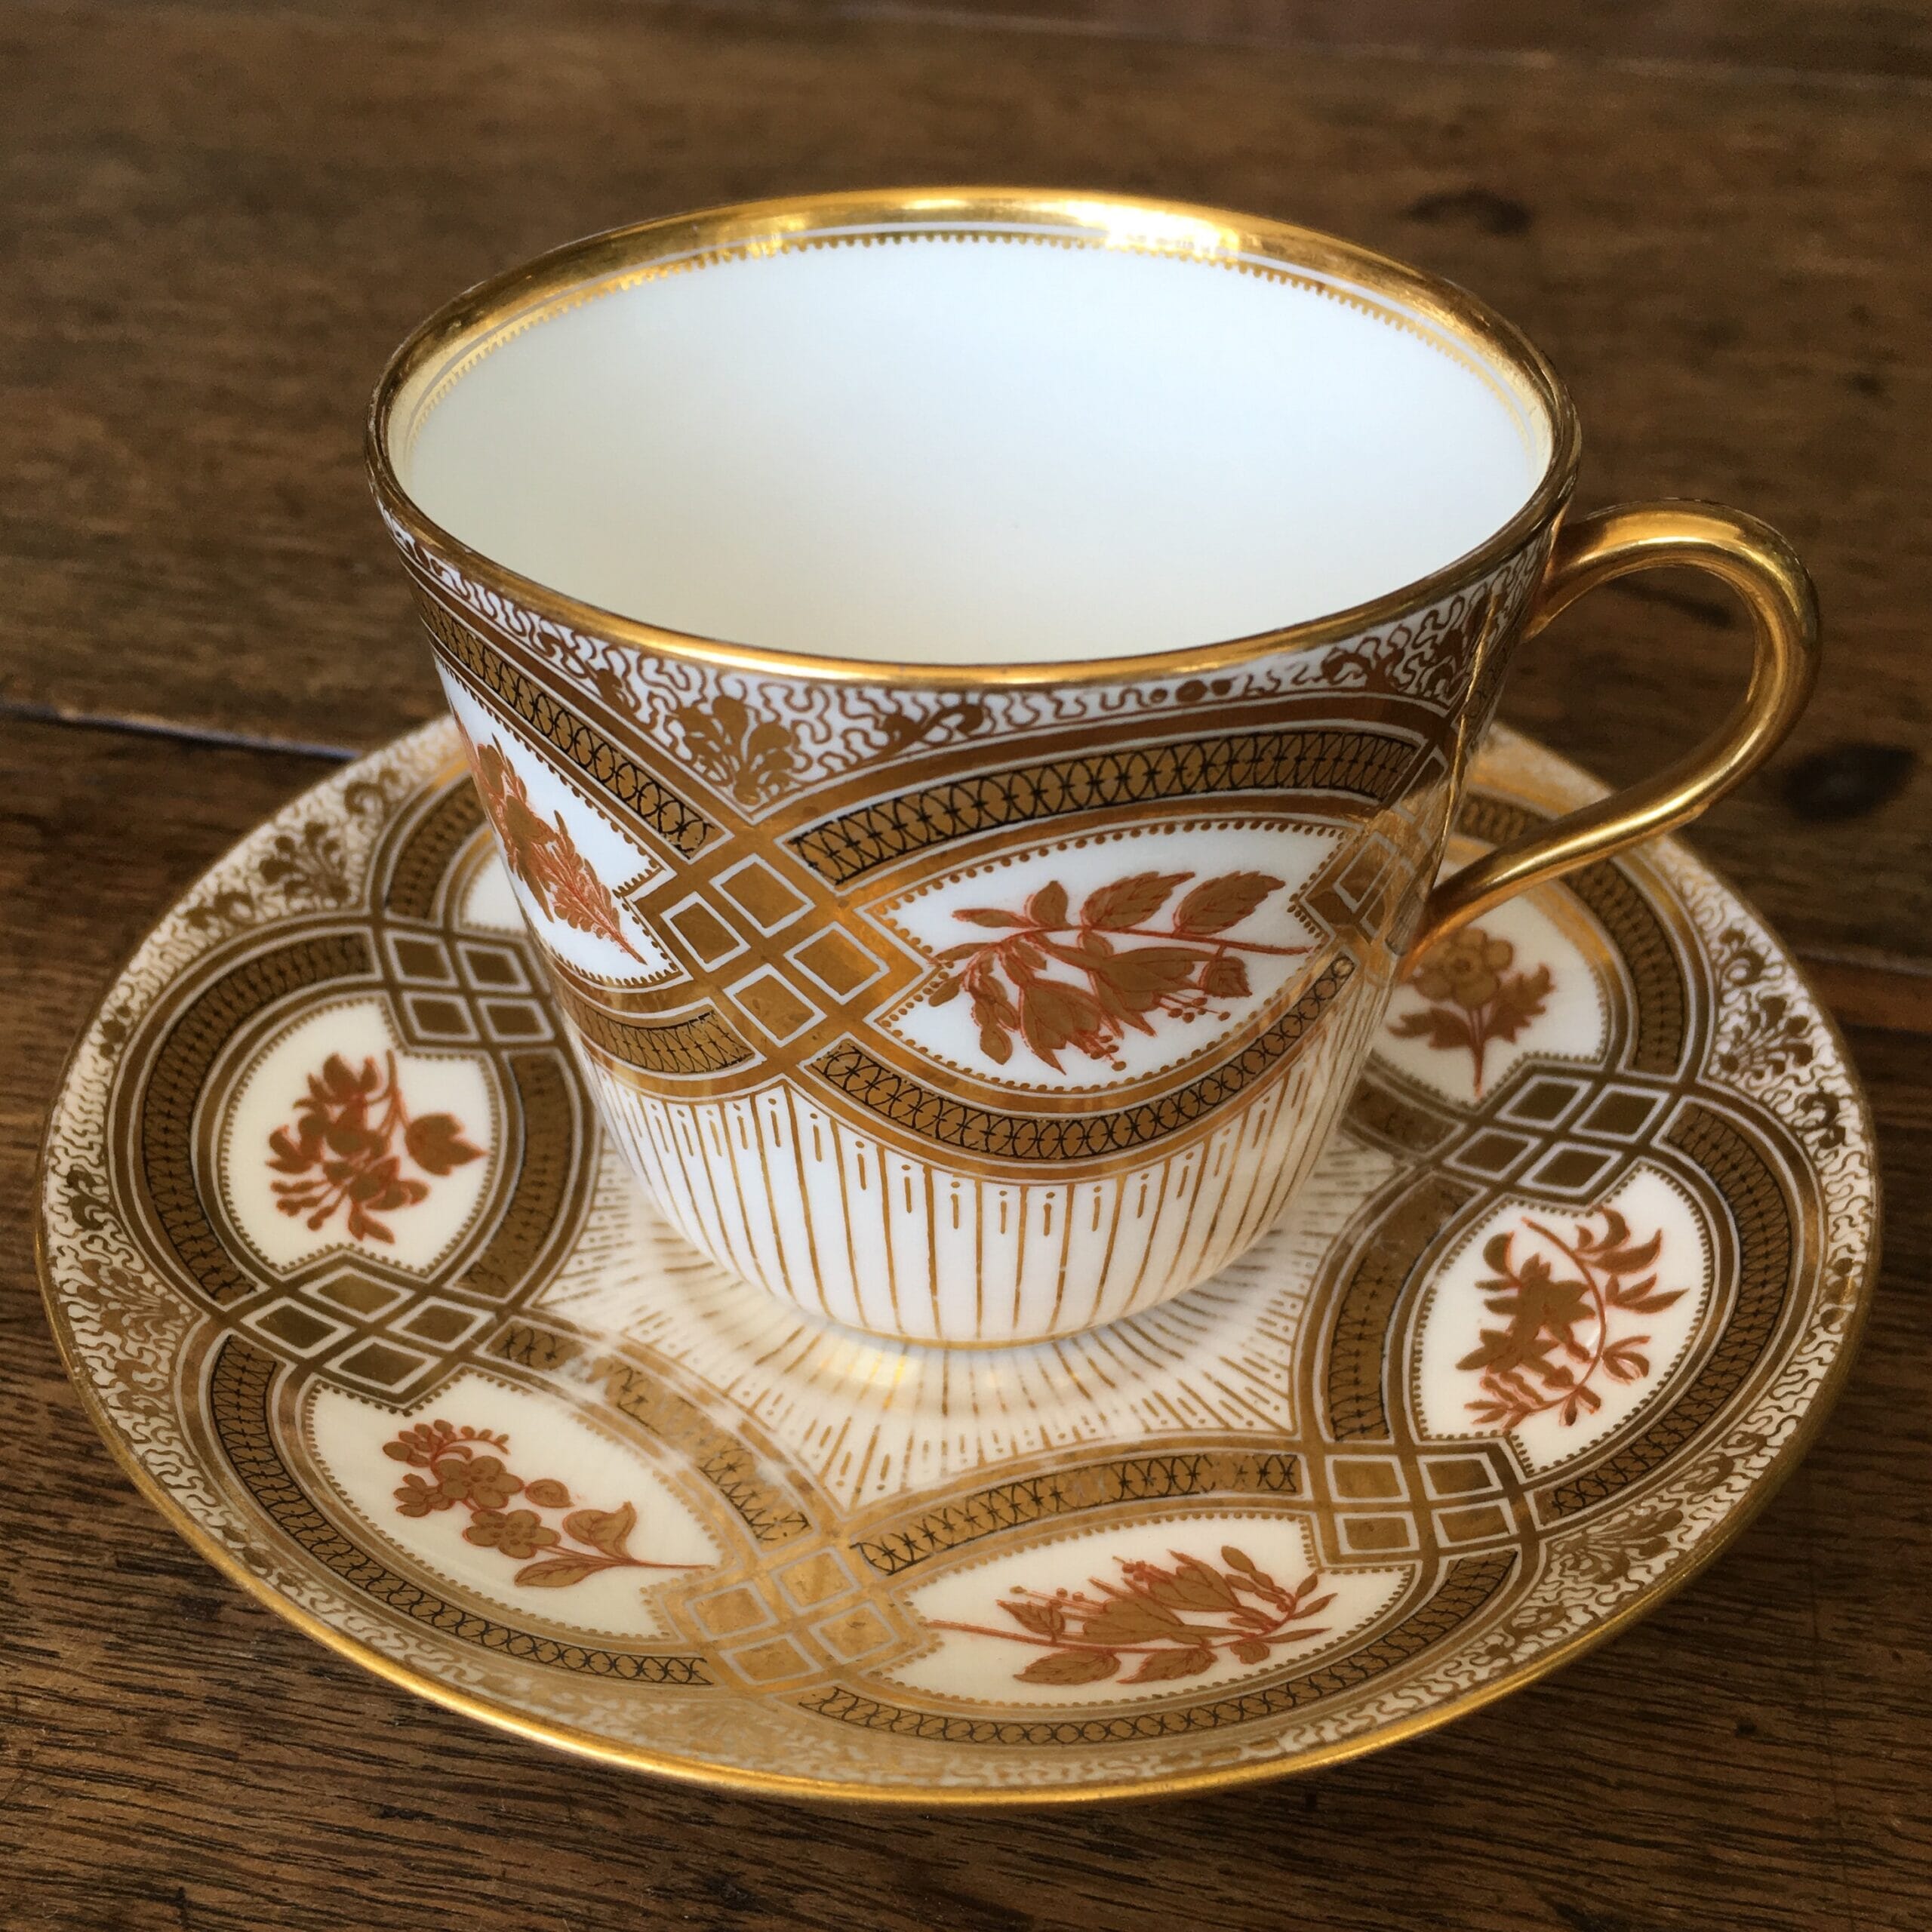 Brown, Westhead, Moore & Co. gilt cup & saucer, c.1865 -0